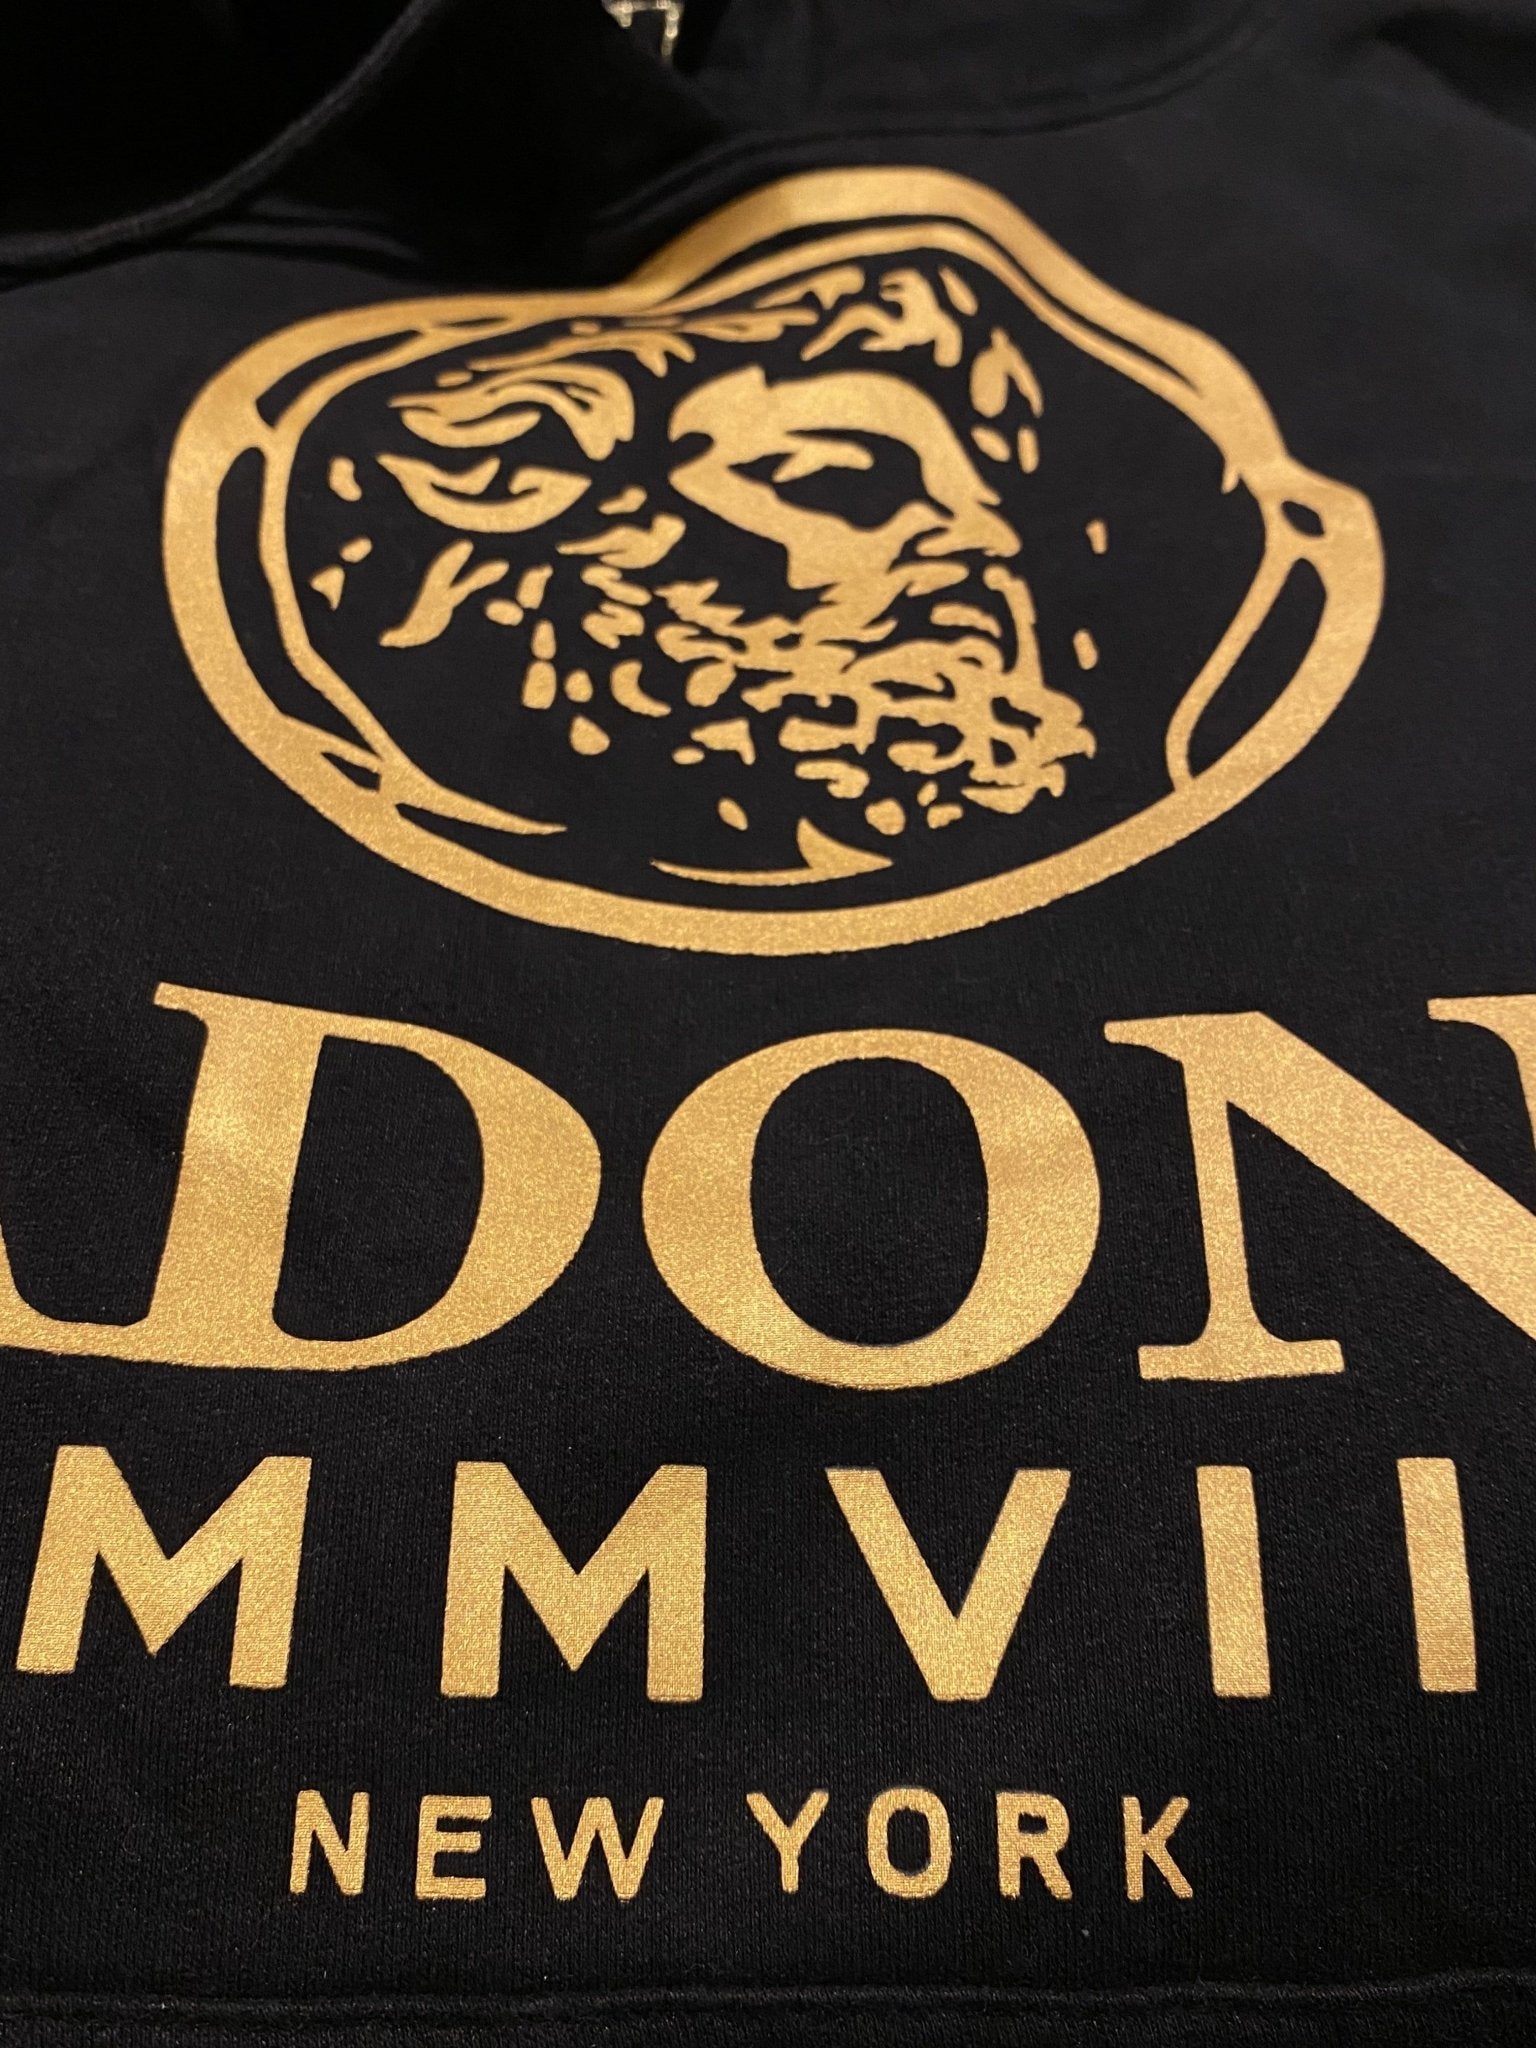 ADONI MMVII NEW YORK Brand New Hooded Track Suit